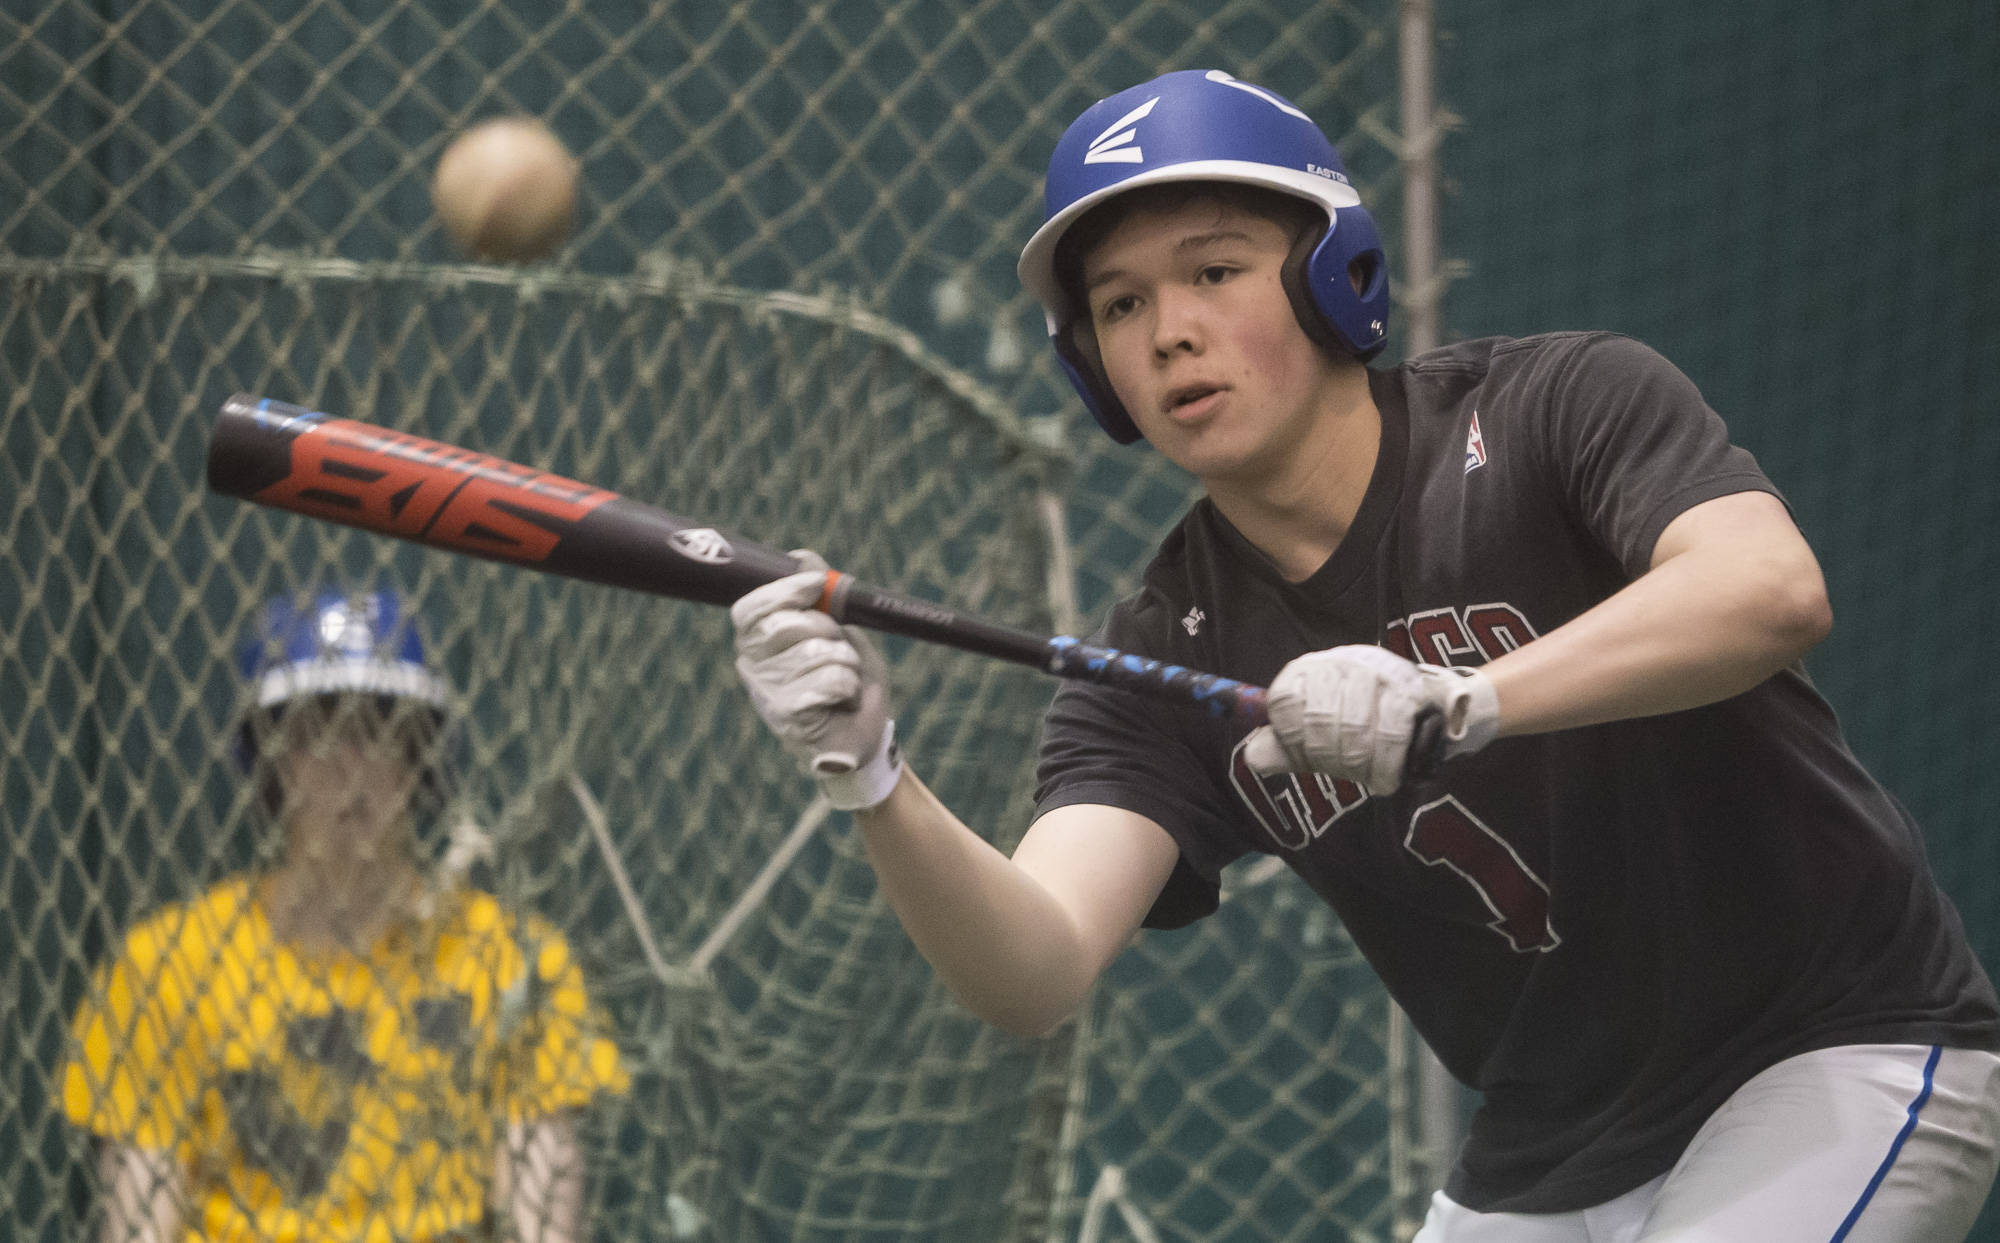 Senior Sammy McKnight works on his bunting skills as junior Cameron Eppers, background, waits his turn during Thunder Mountain High School baseball practice at the Wells Fargo Dimond Park Fieldhouse on Tuesday, April 24, 2018. (Michael Penn | Juneau Empire)